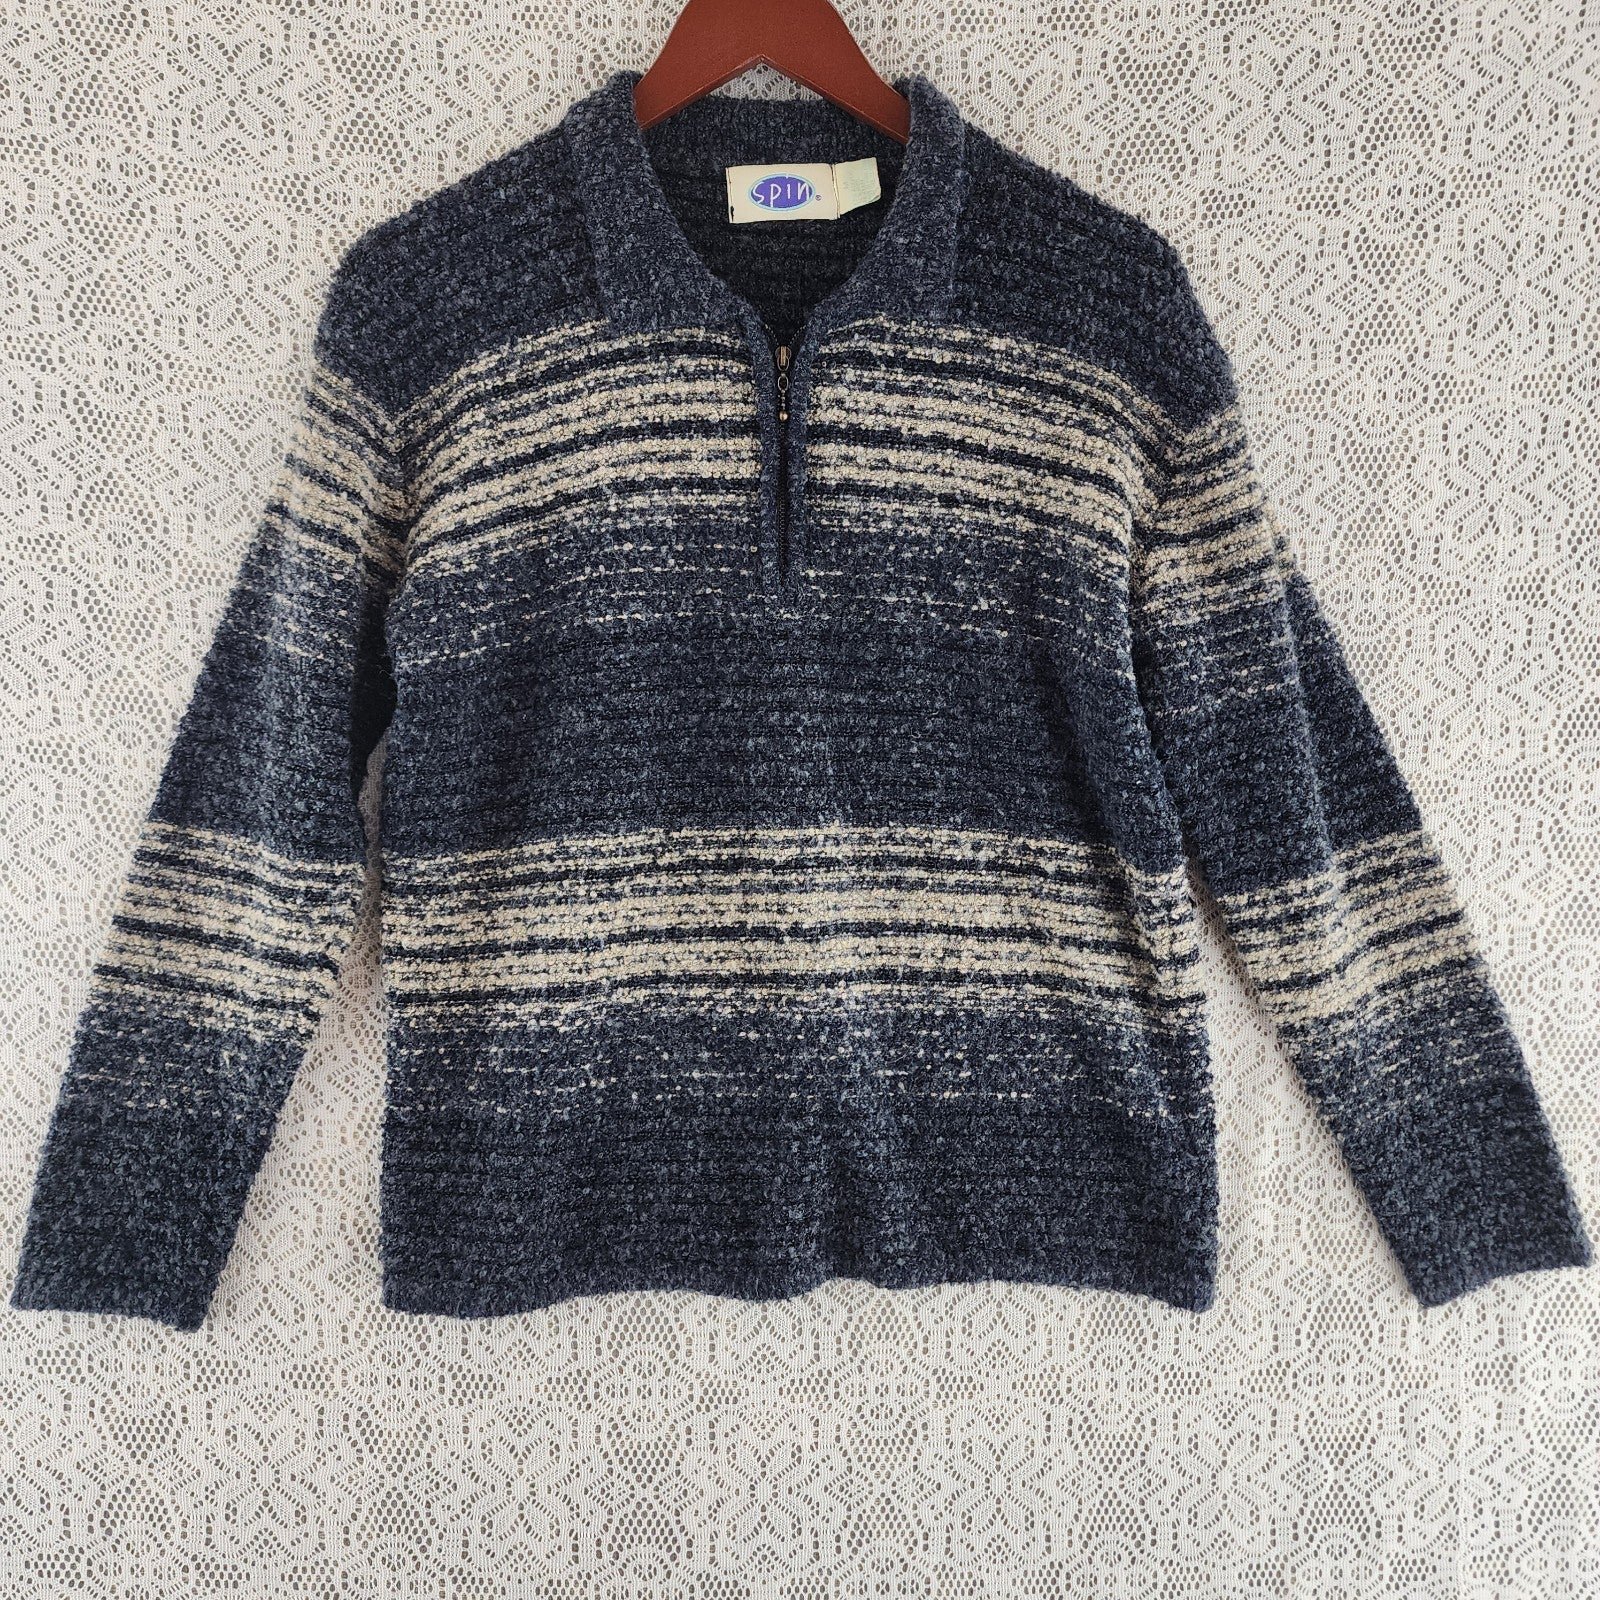 Gorgeous Vintage Spin Wool Blend Collar Pull Over Women´s Tweed Sweater M iEPpB0T3w Great